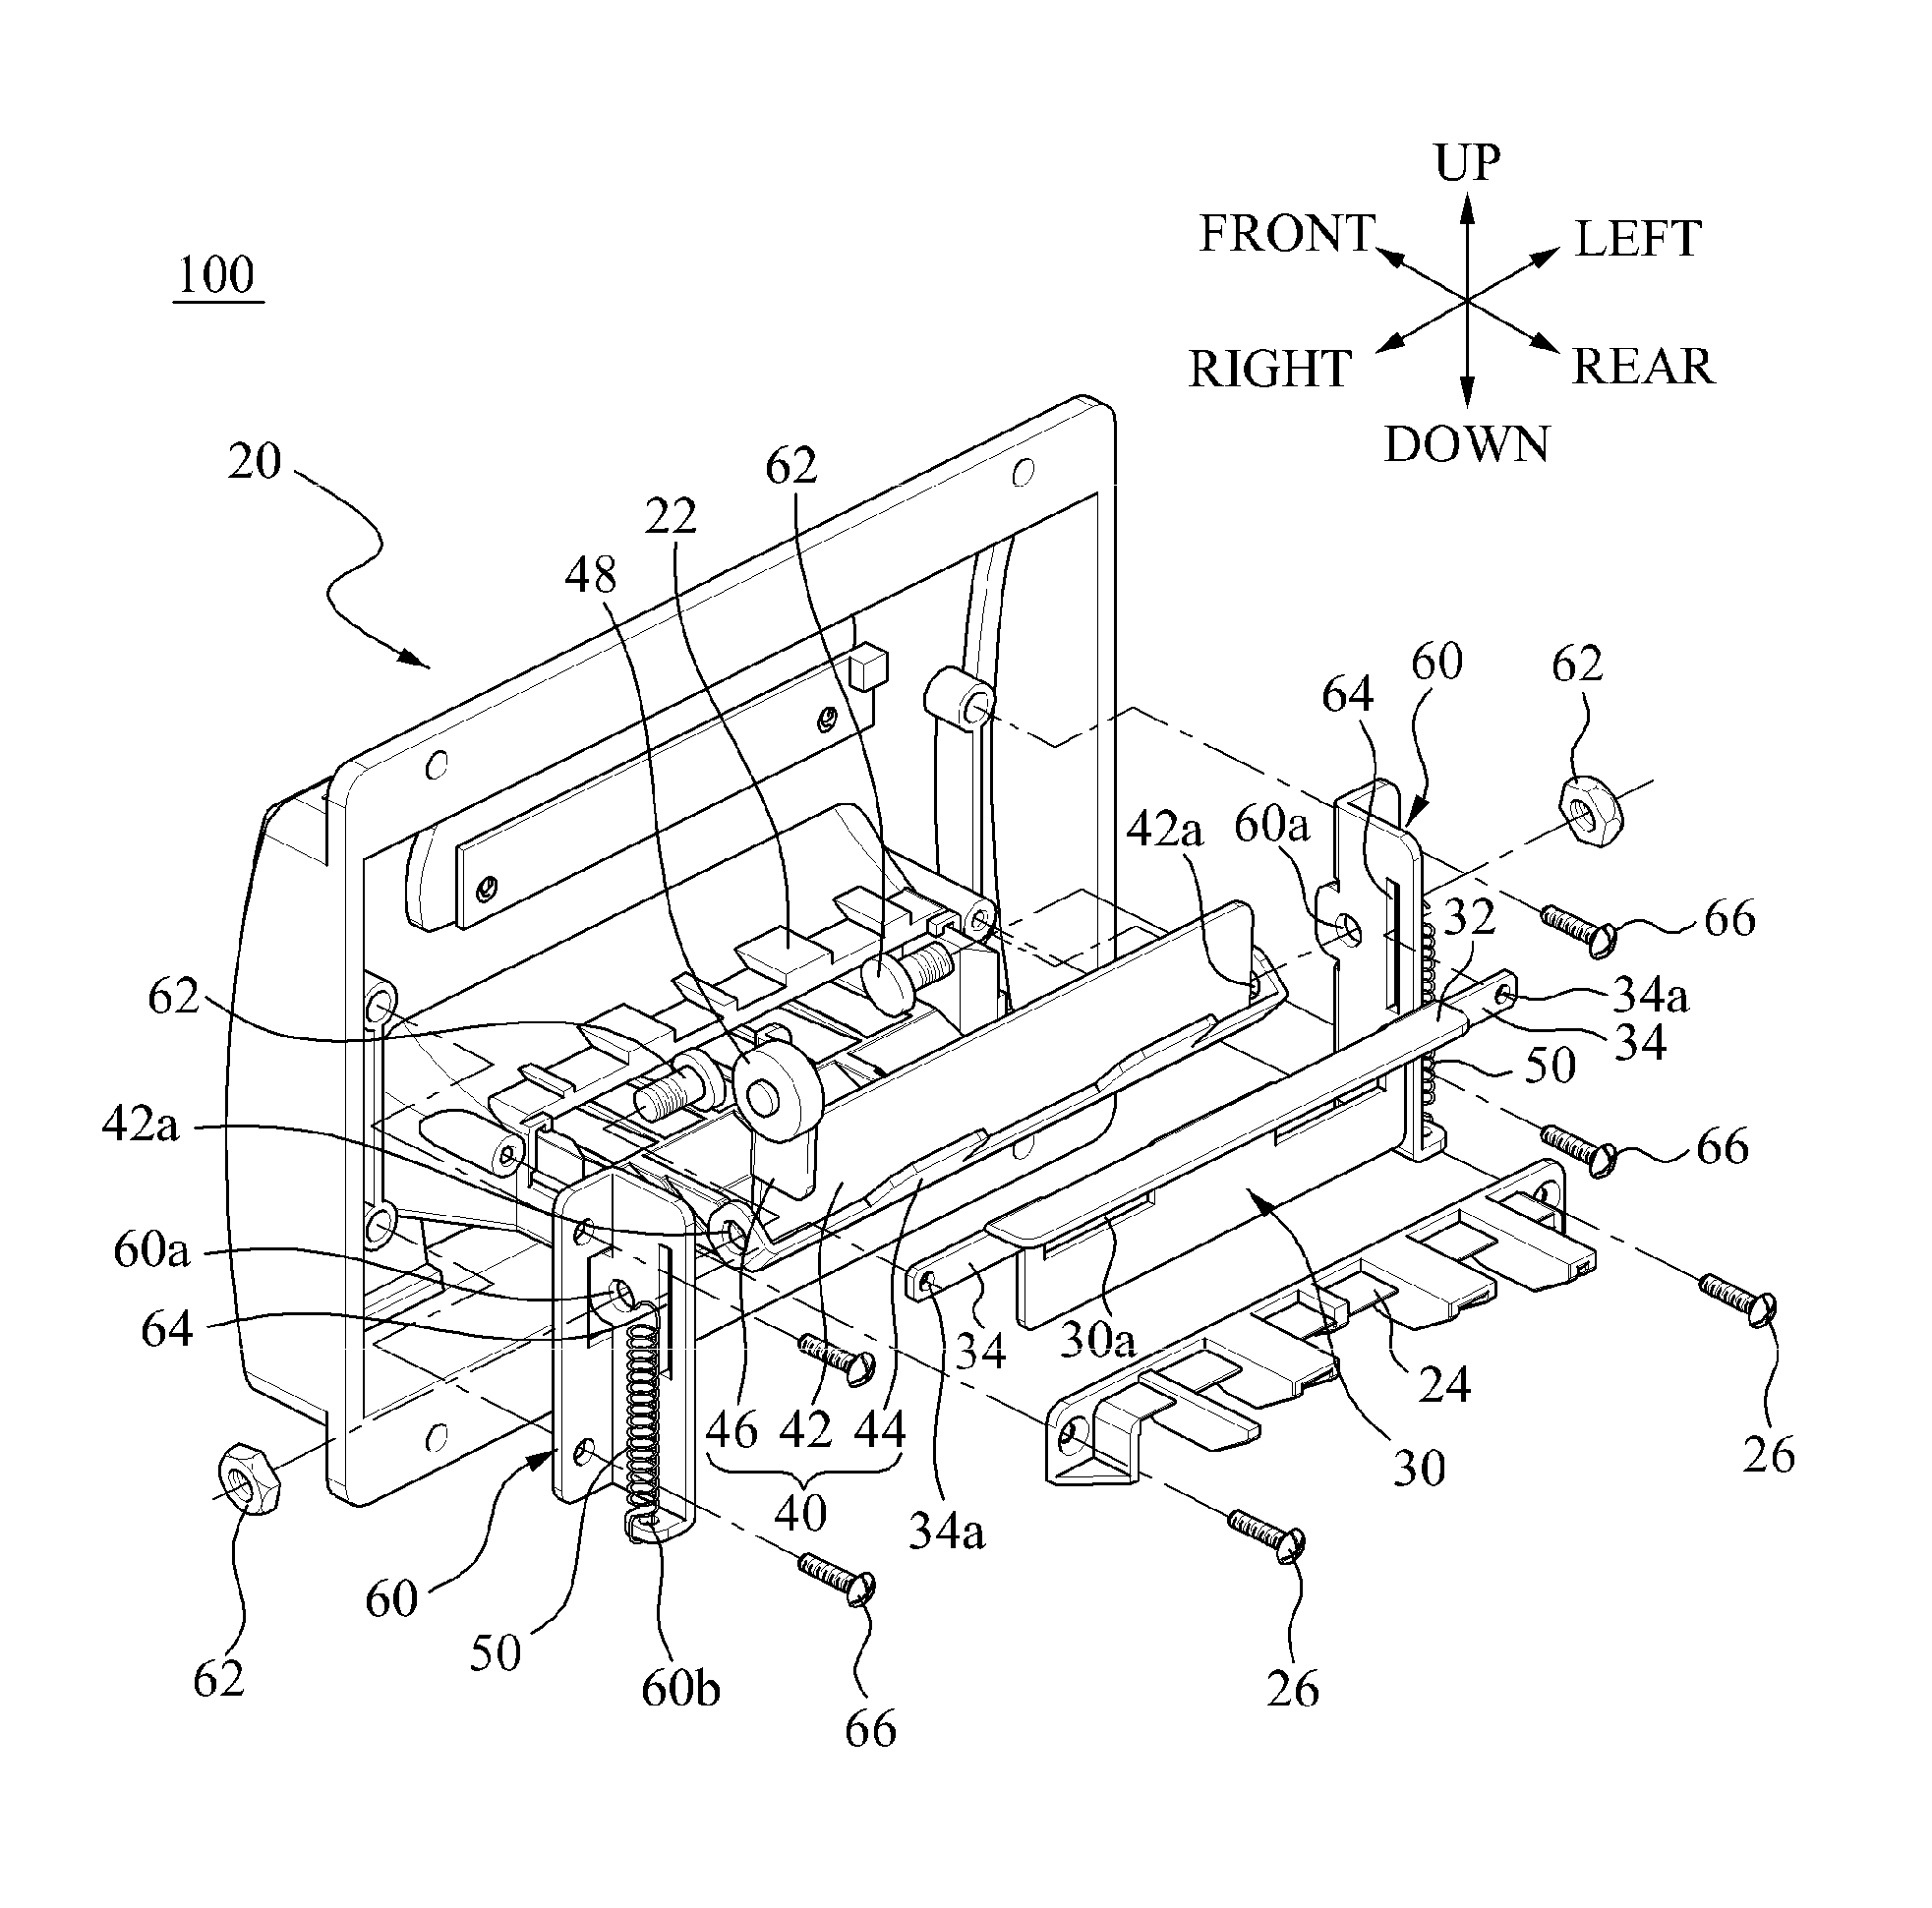 Apparatus for Opening and Closing the Shield Plate of Automated Teller Machine